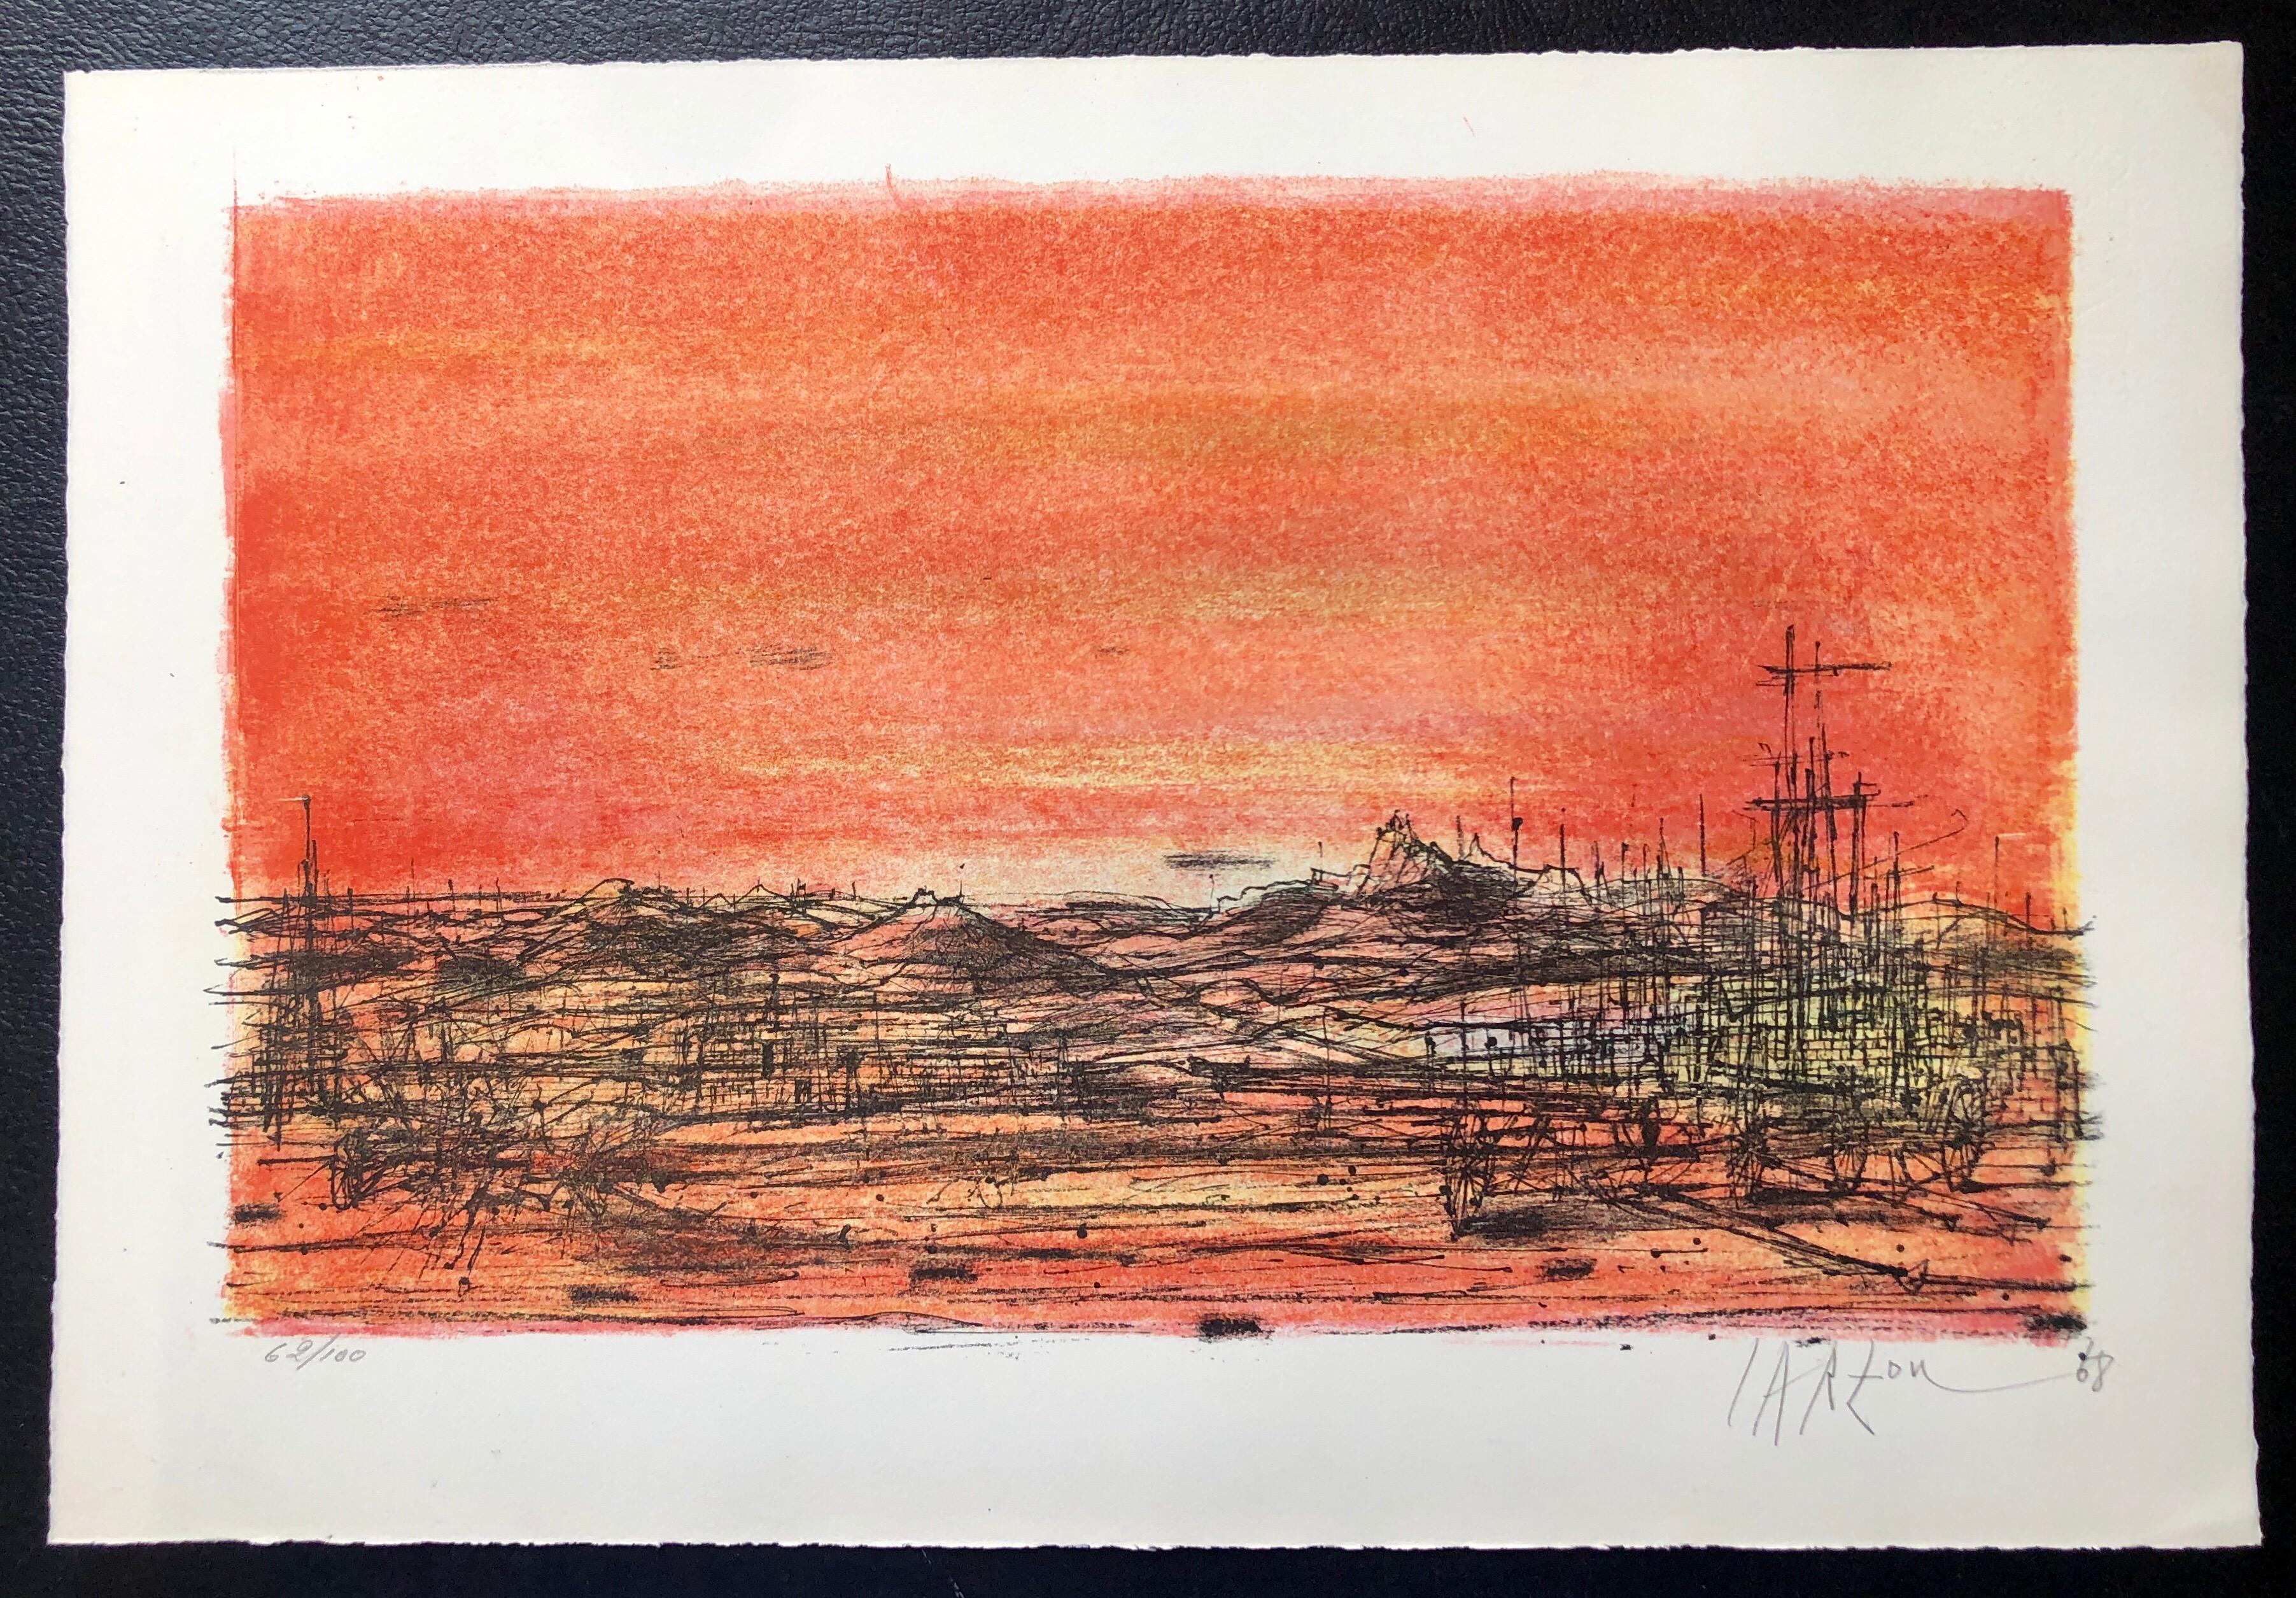 This is a hand signed in pencil, vintage, limited edition lithograph modern art print, printed in Switzerland on Rives French art paper in 1968. in shades of red, orange, green, yellow.
Jean Carzou (Armenian: Ժան Գառզու, 1 January 1907 – 12 August